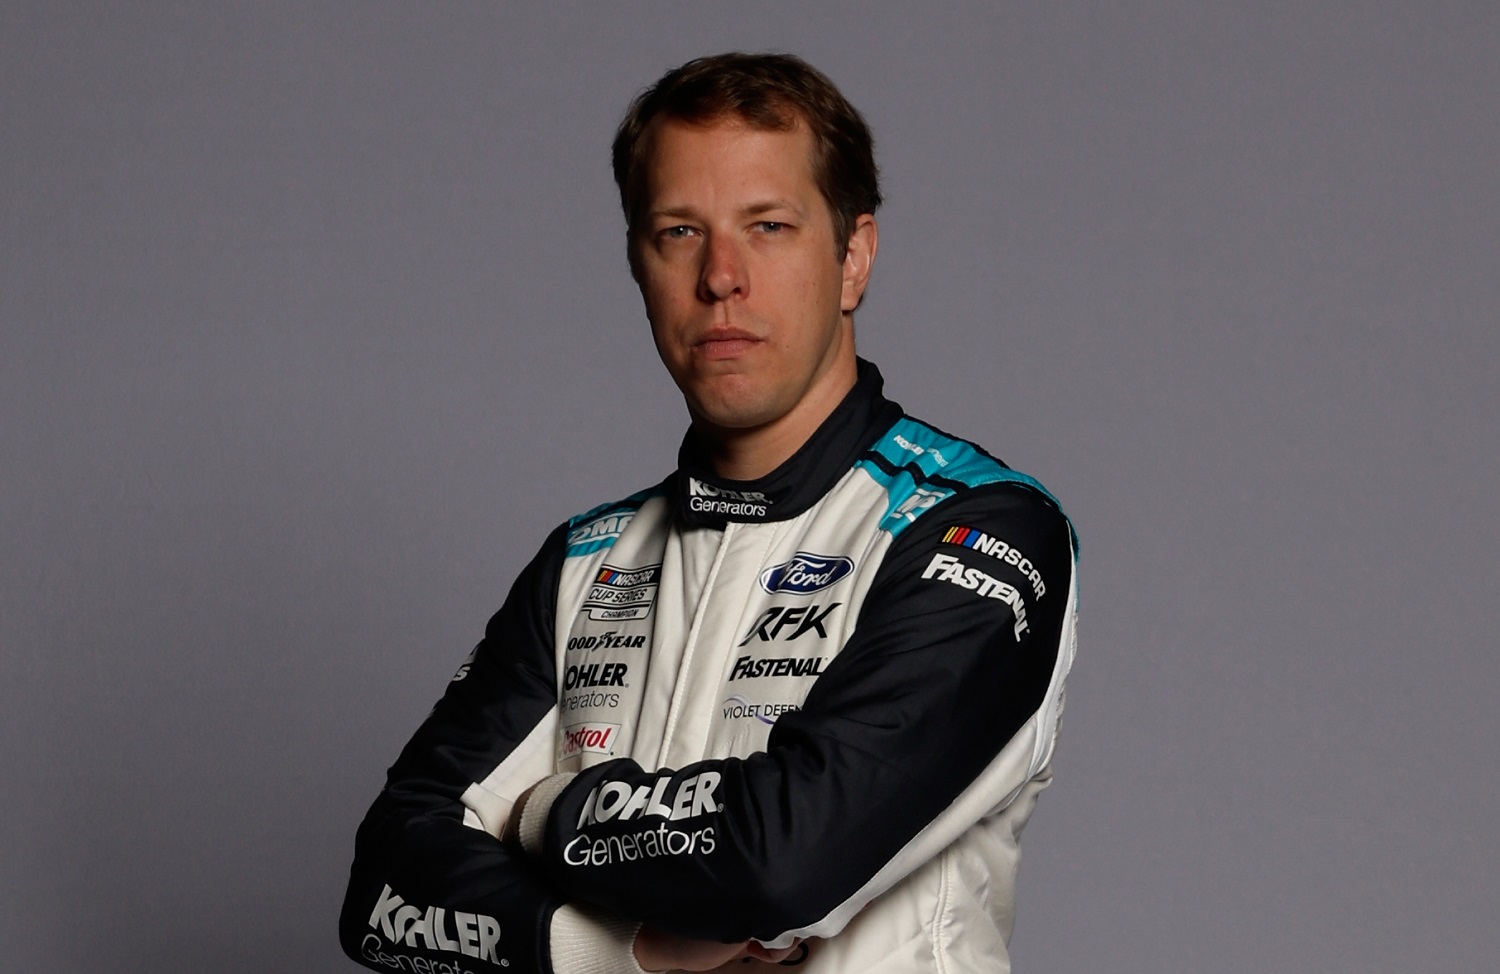 Brad Keselowski poses for a photo during NASCAR Production Days at Clutch Studios on Jan. 18, 2022, in Concord, North Carolina.